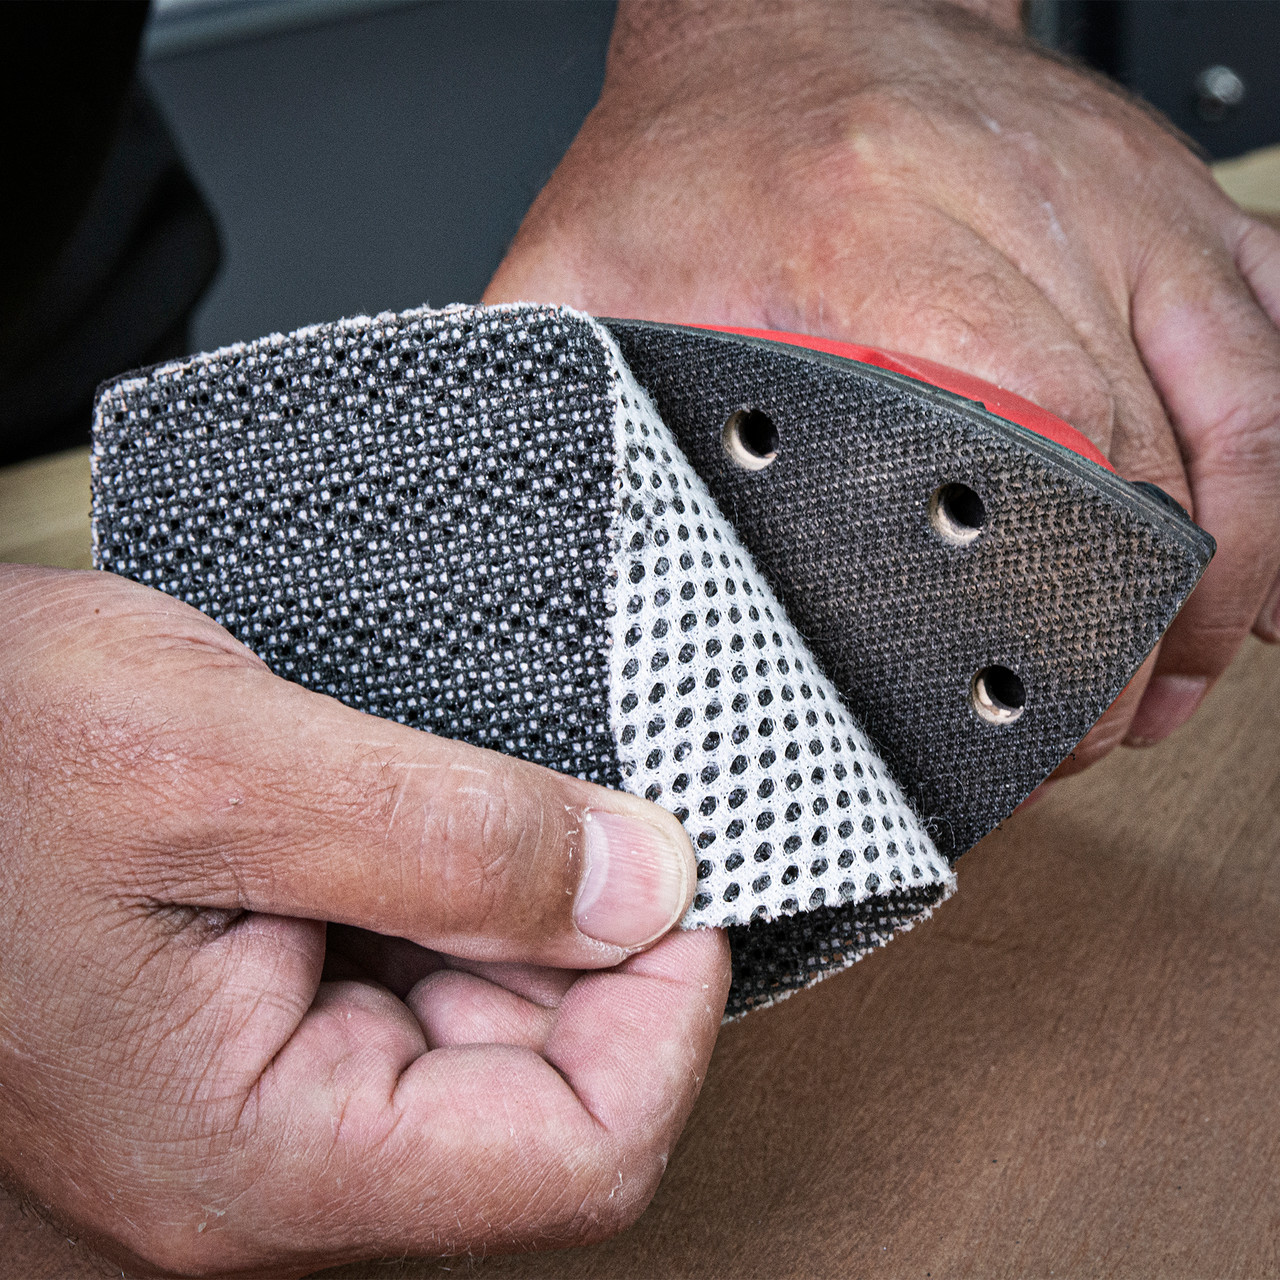 Mesh design eliminates the need to line up extraction holes for faster application